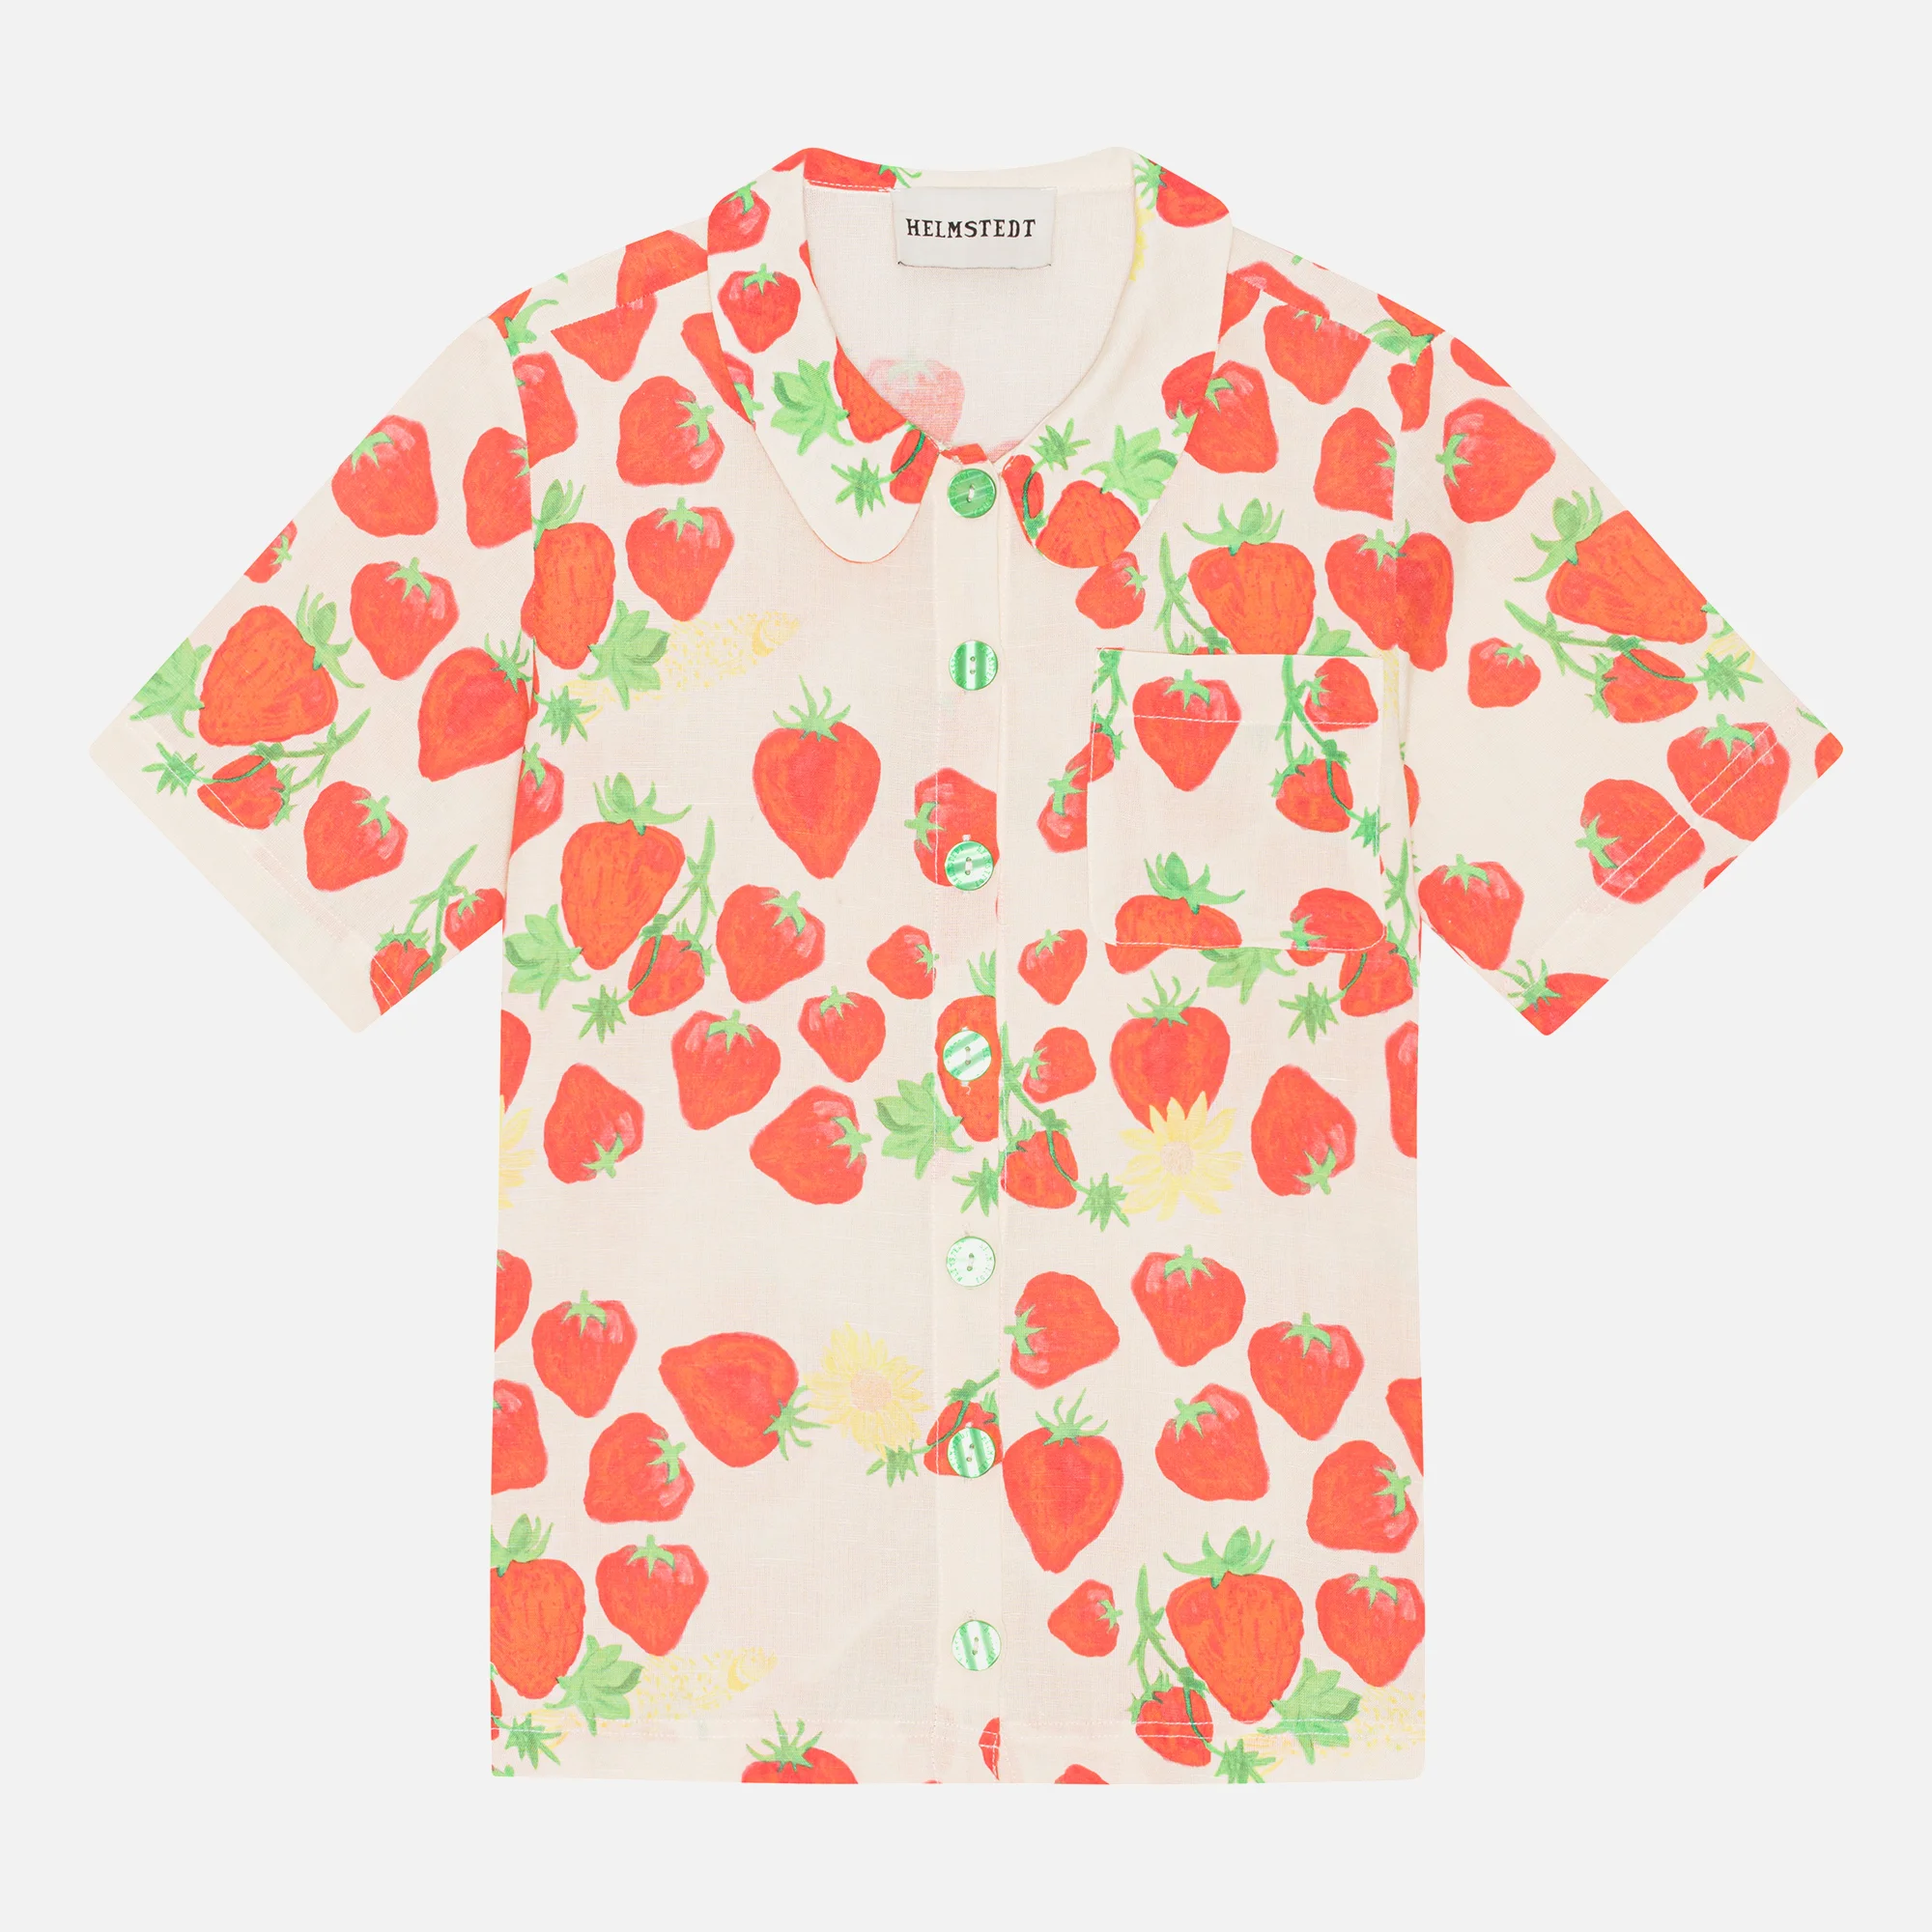 Helmstedt Strawberry Terry Printed Linen-Blend Shirt Image 1